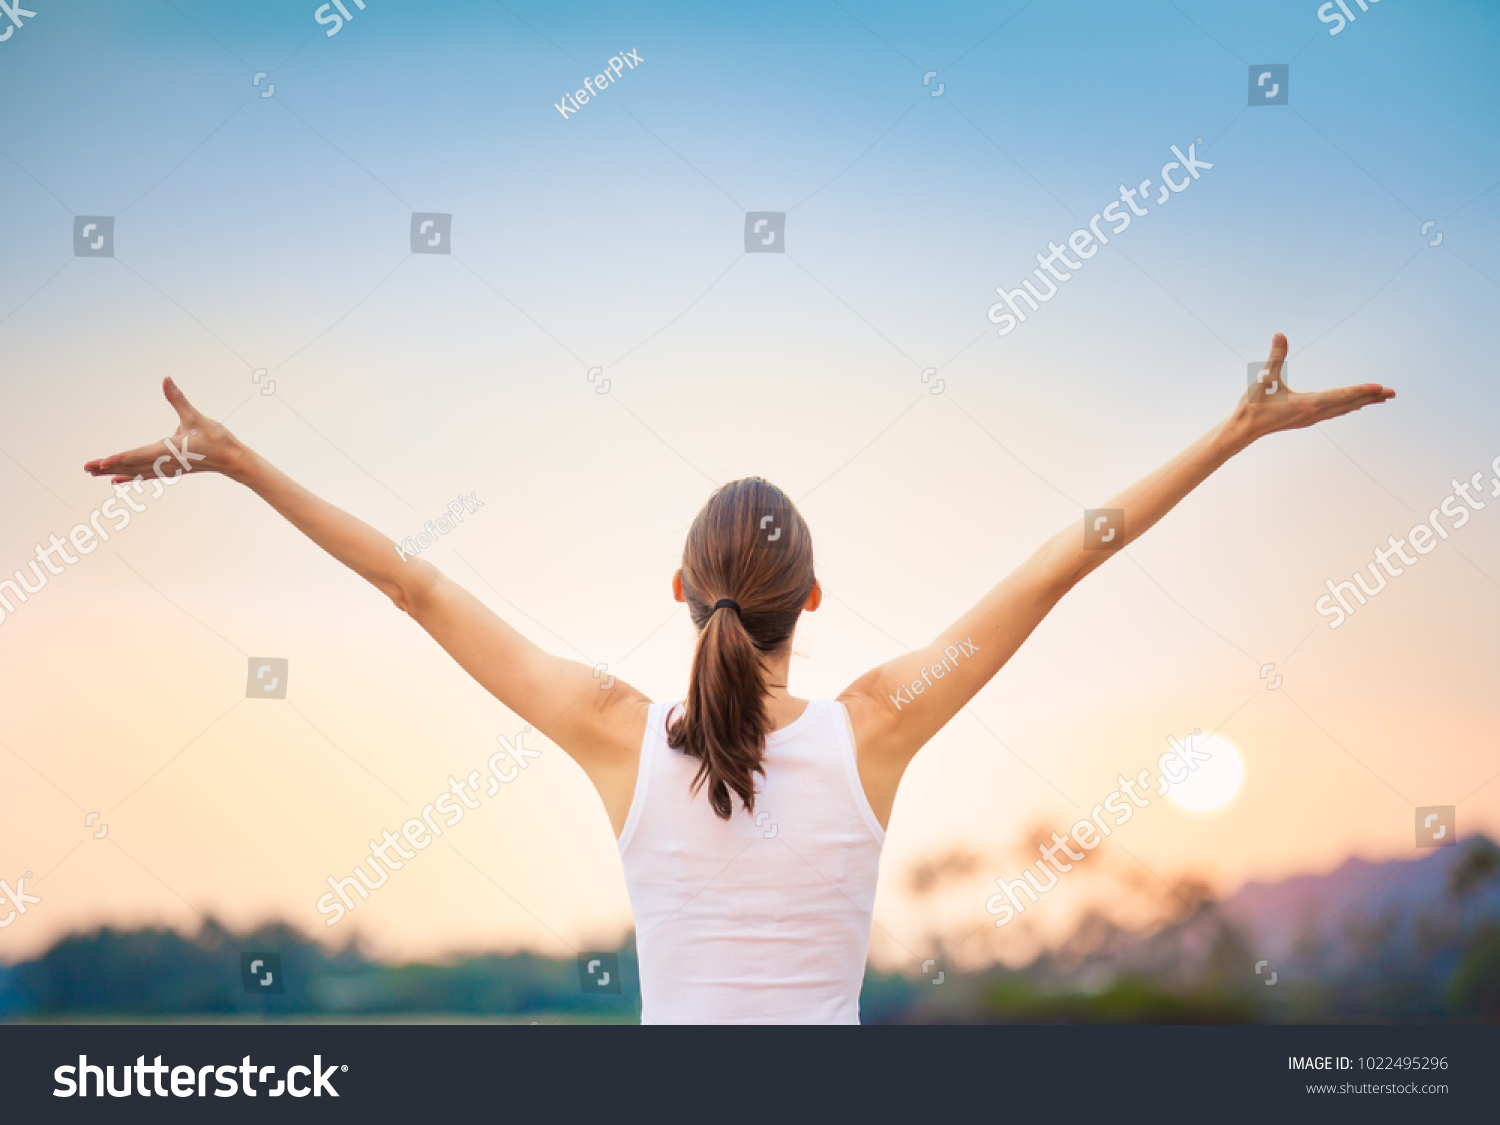 Young woman raising her arms up against the sunset feeling free.  Happiness and joy concept.  #1022495296